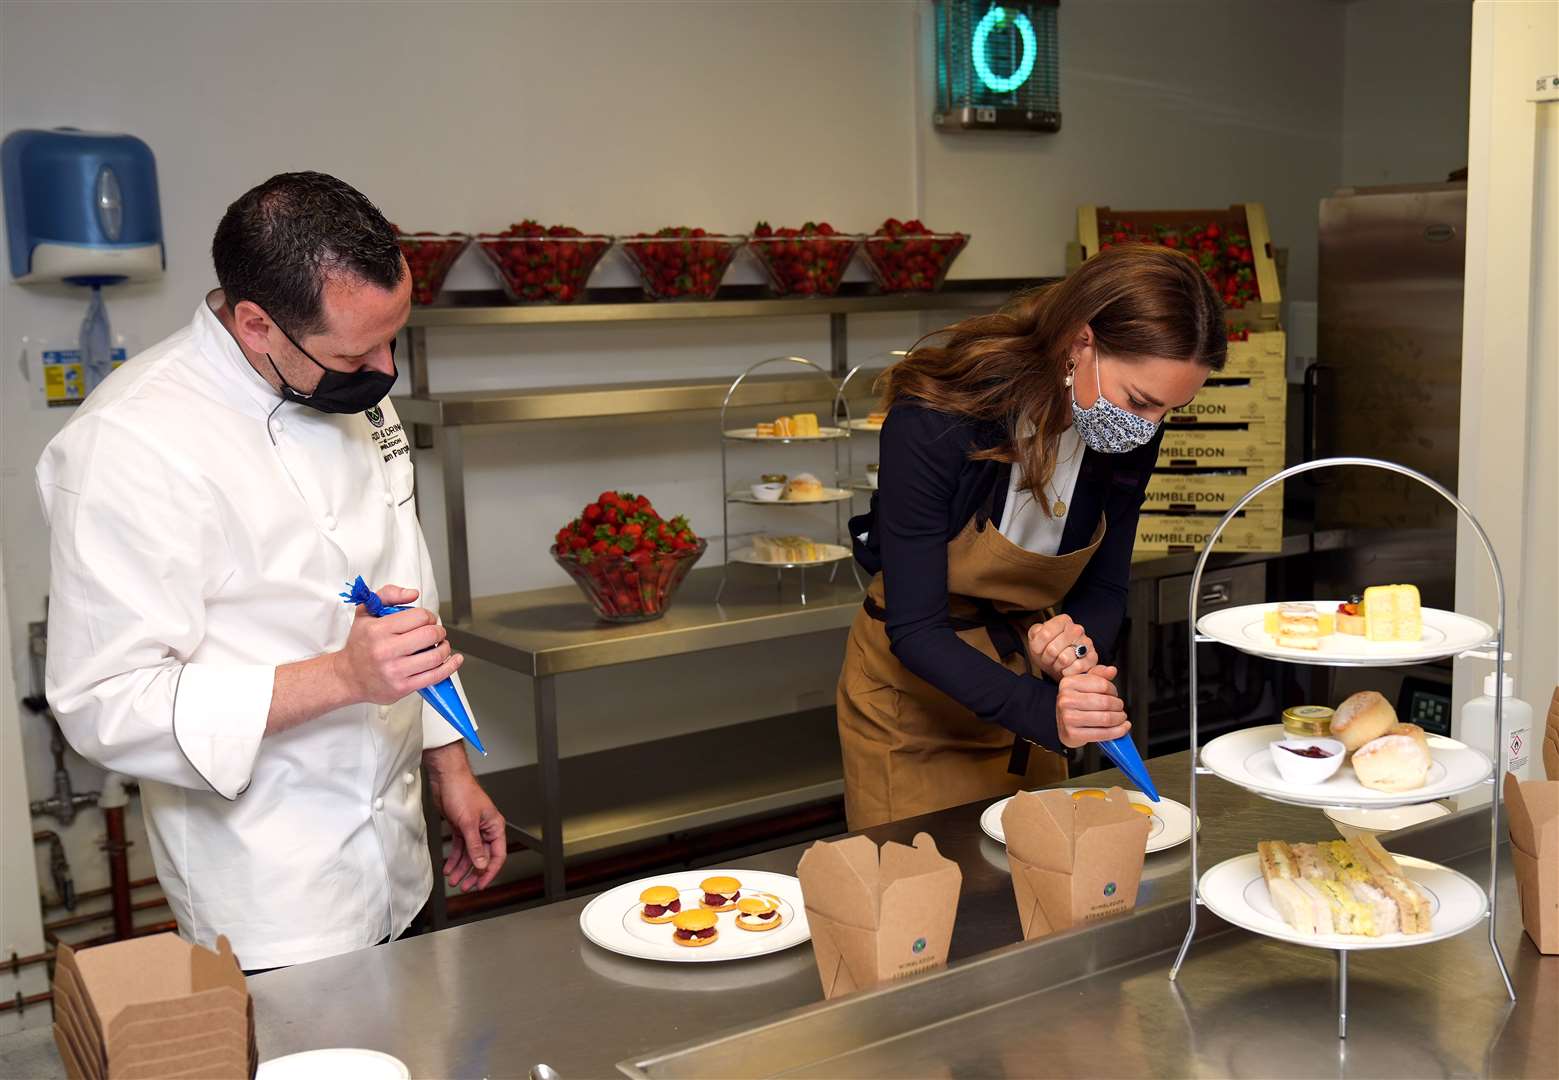 The Duchess of Cambridge helped prepare strawberry desserts in the kitchens at Wimbledon during her visit (John Walton/PA)